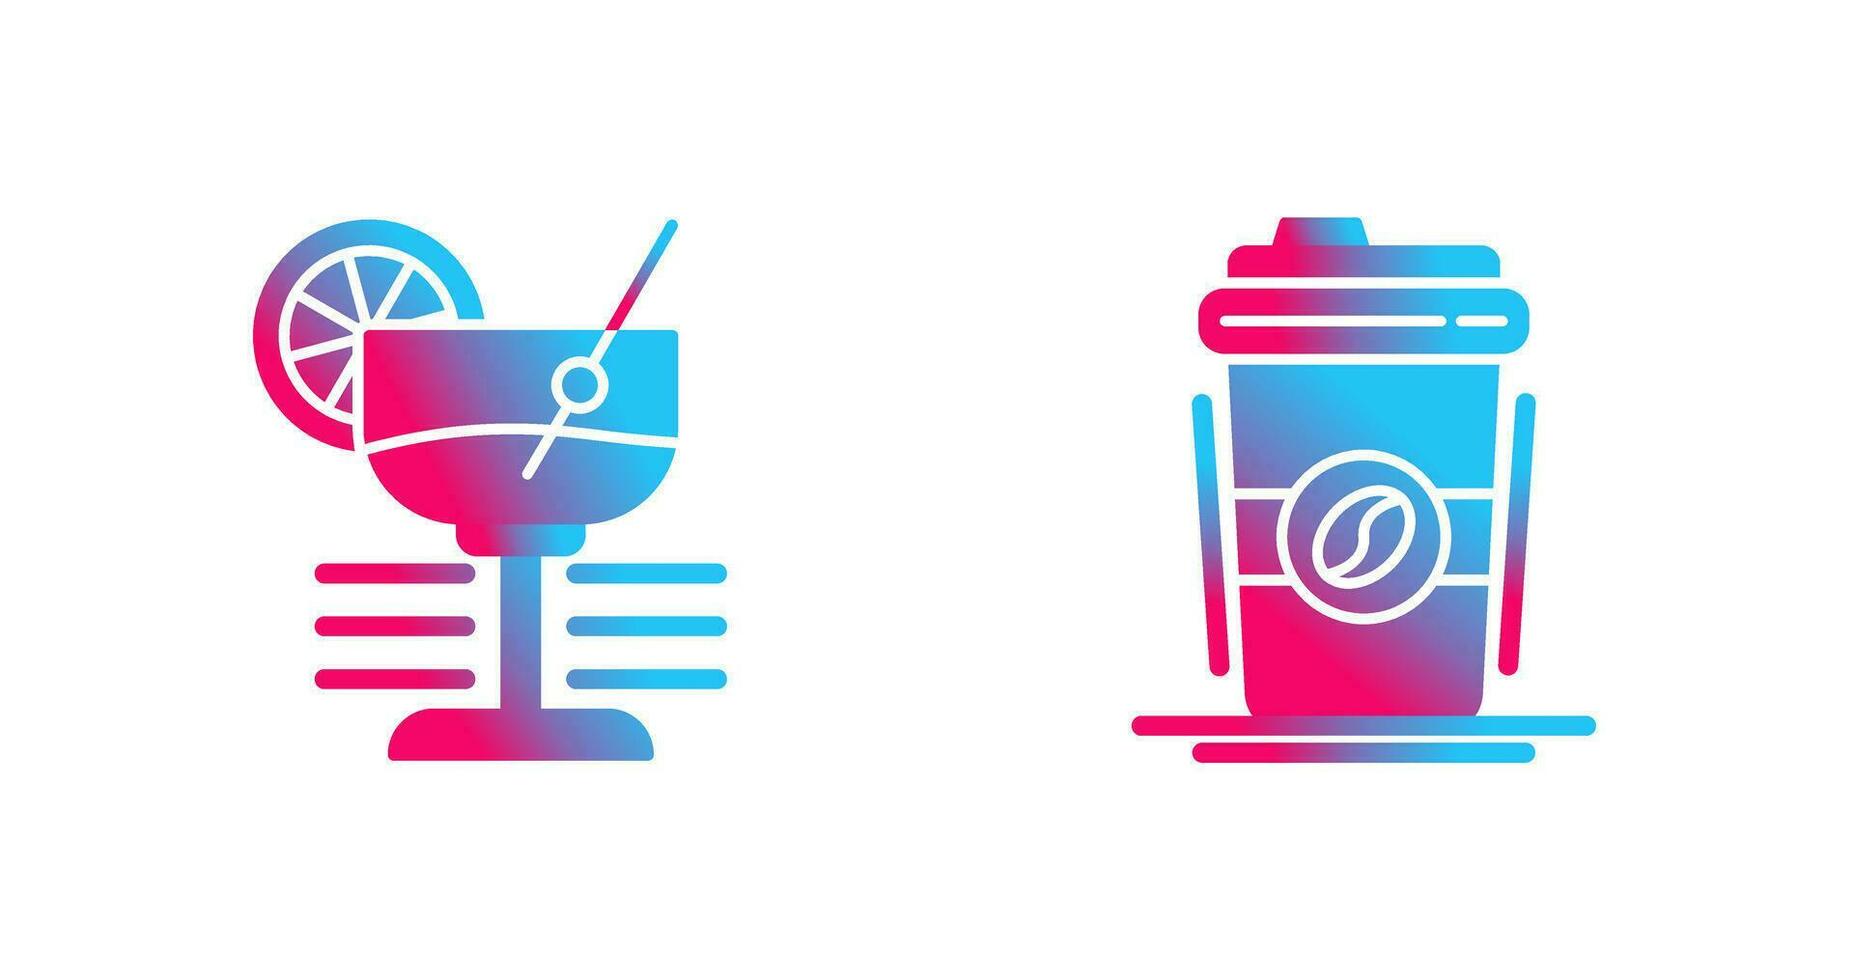 Martini and Coffee Cup Icon vector